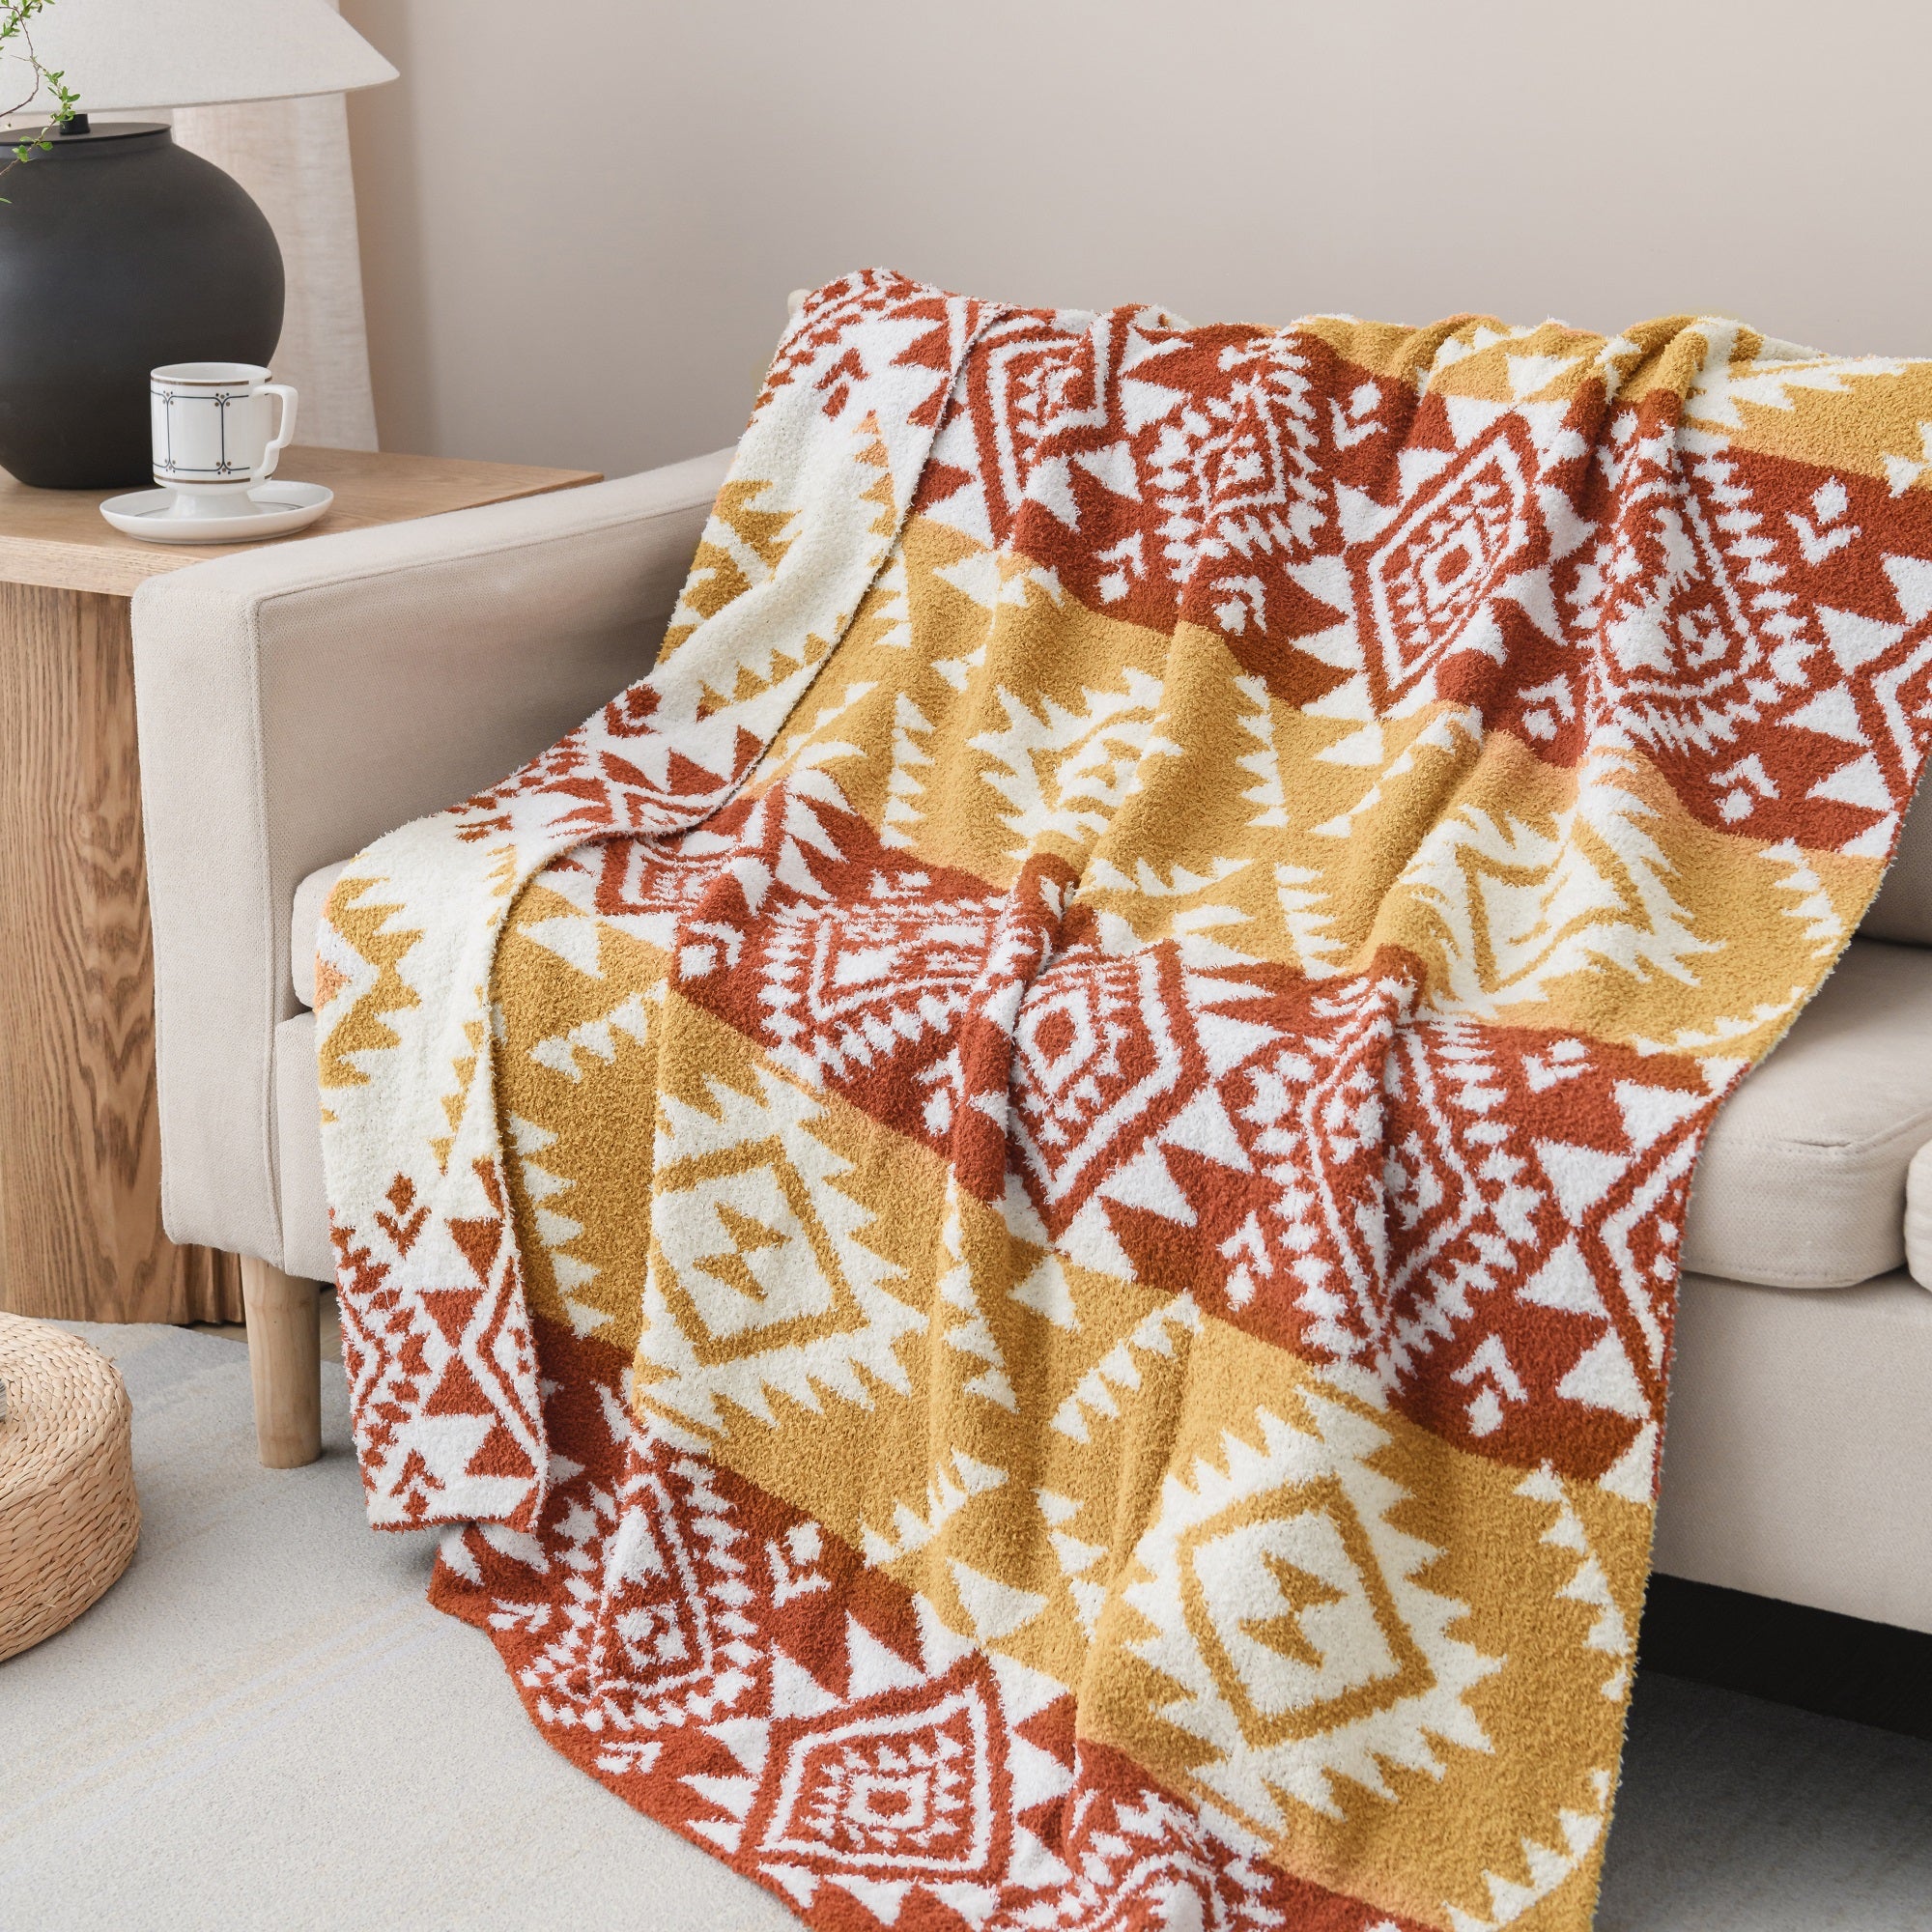 Jacquard Knit Throw Throw Blanket 50 x 60 inches Brown Aztec